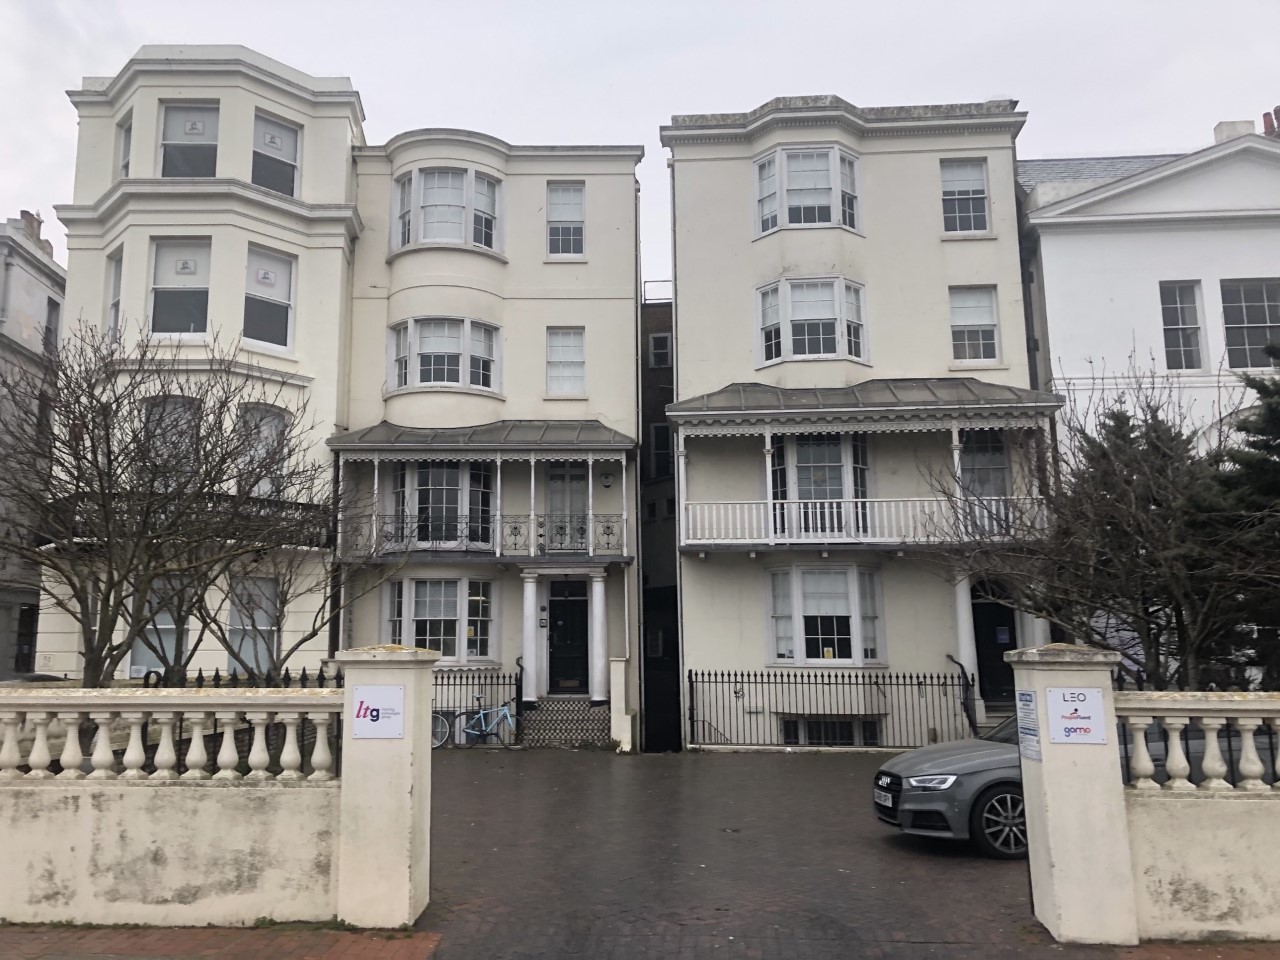 Office for rent in Brighton. From PS&B - Carr & Priddle - Brighton